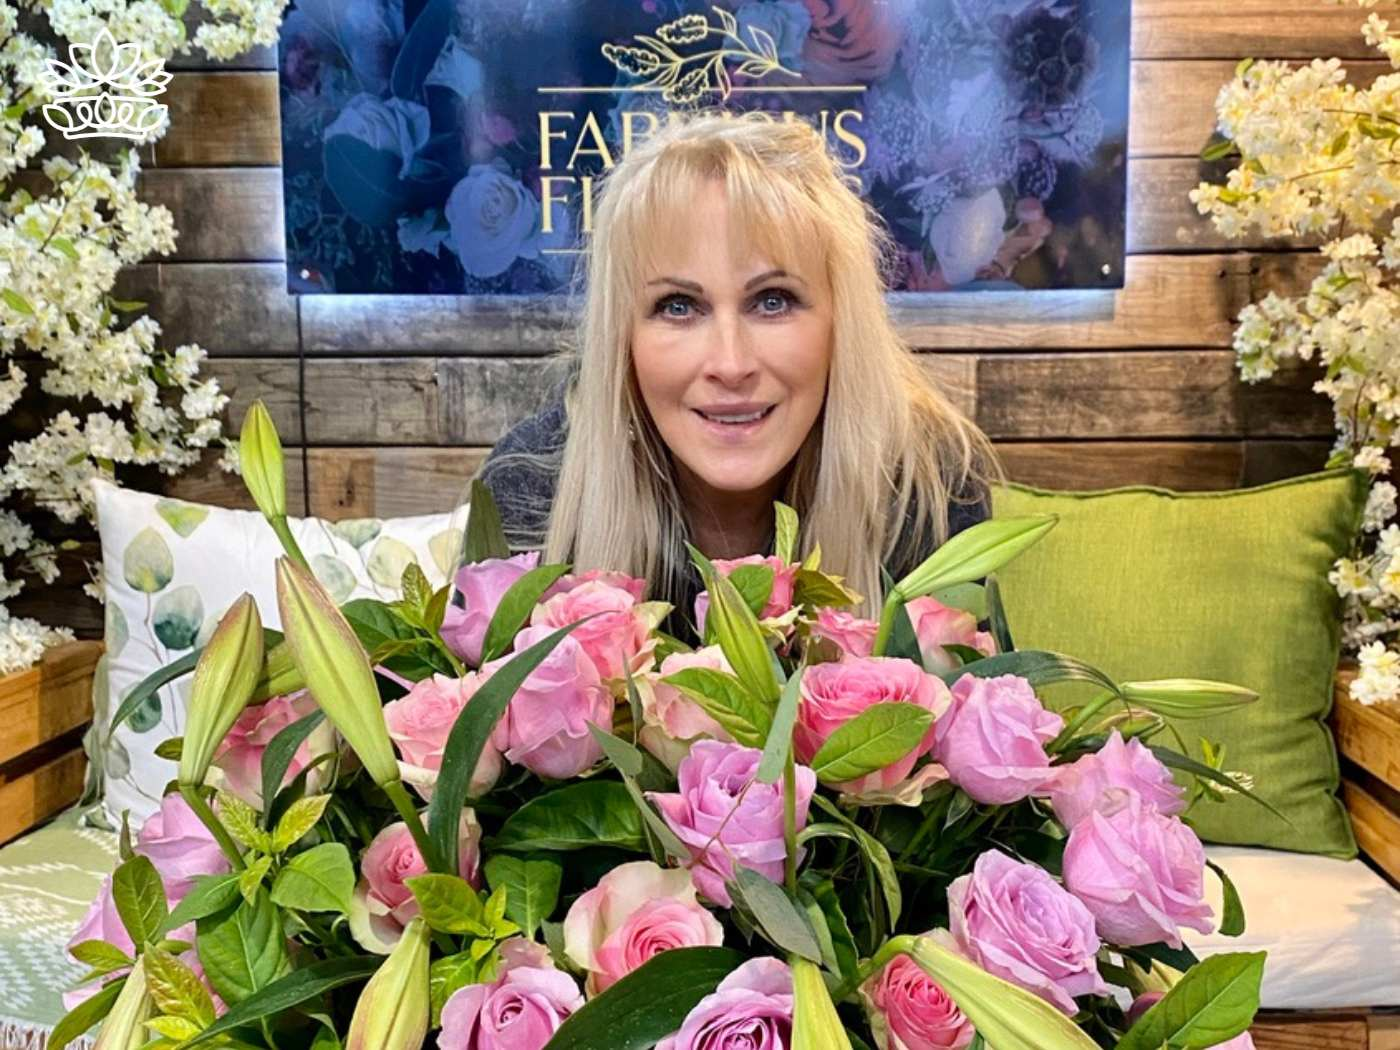 A woman with blonde hair smiles behind a vibrant display of pink roses and budding lilies, set in a cozy corner adorned with floral decorations at Fabulous Flowers and Gifts, part of the Flowers By Occasion Collection.